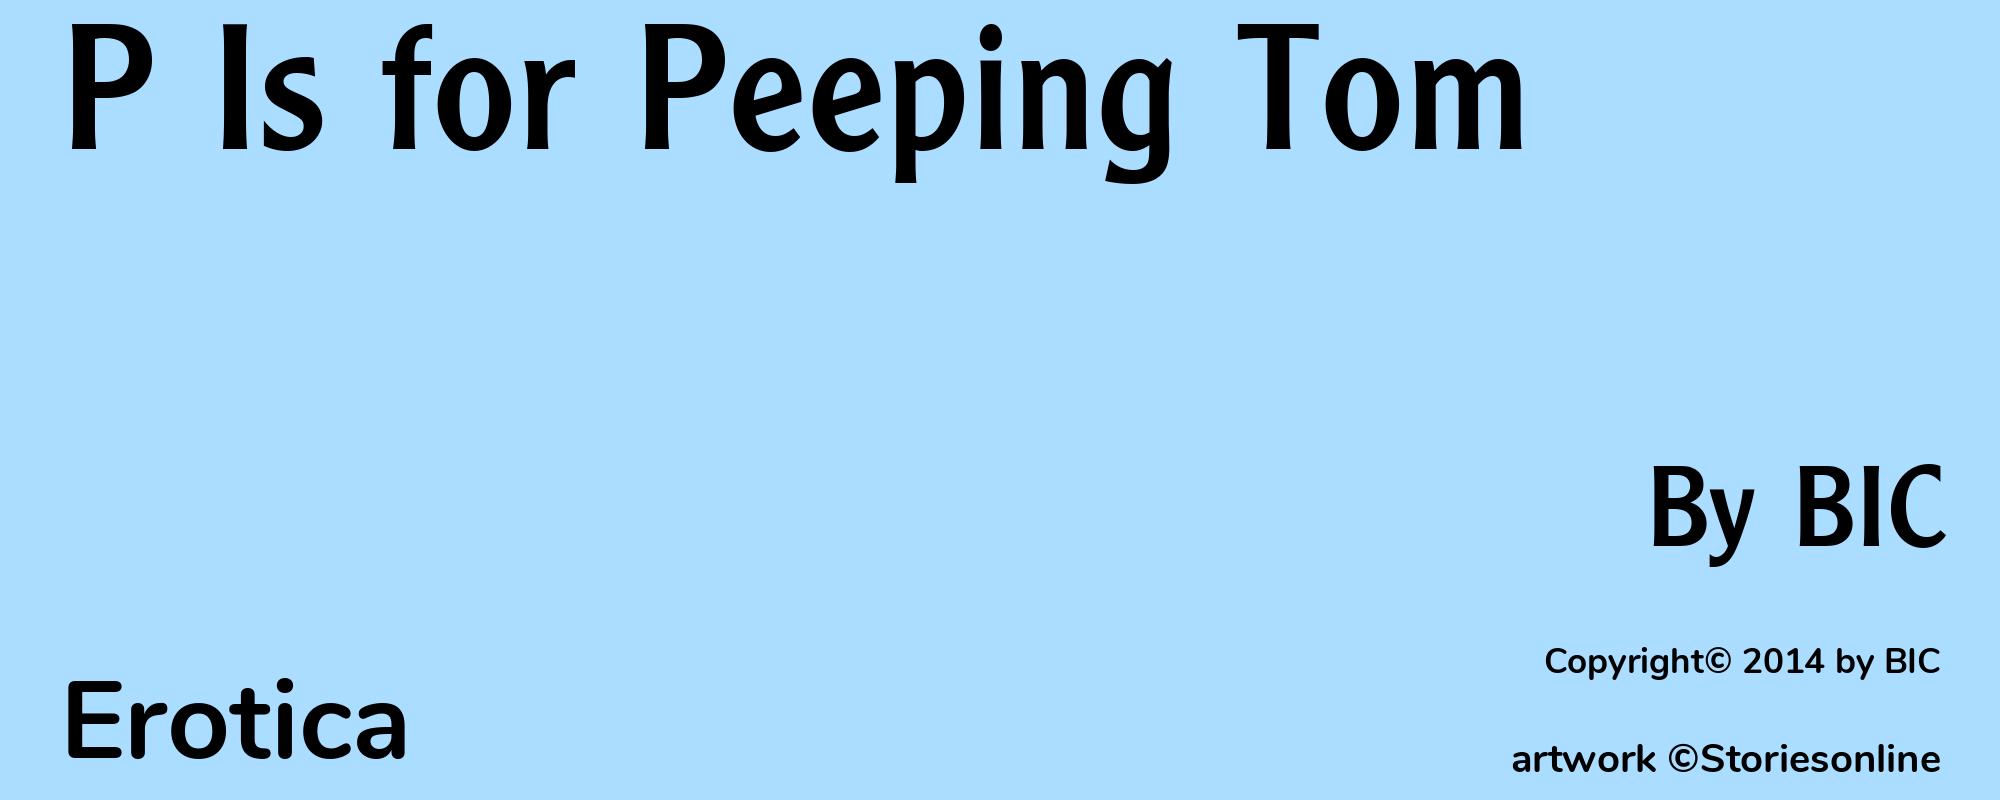 P Is for Peeping Tom - Cover